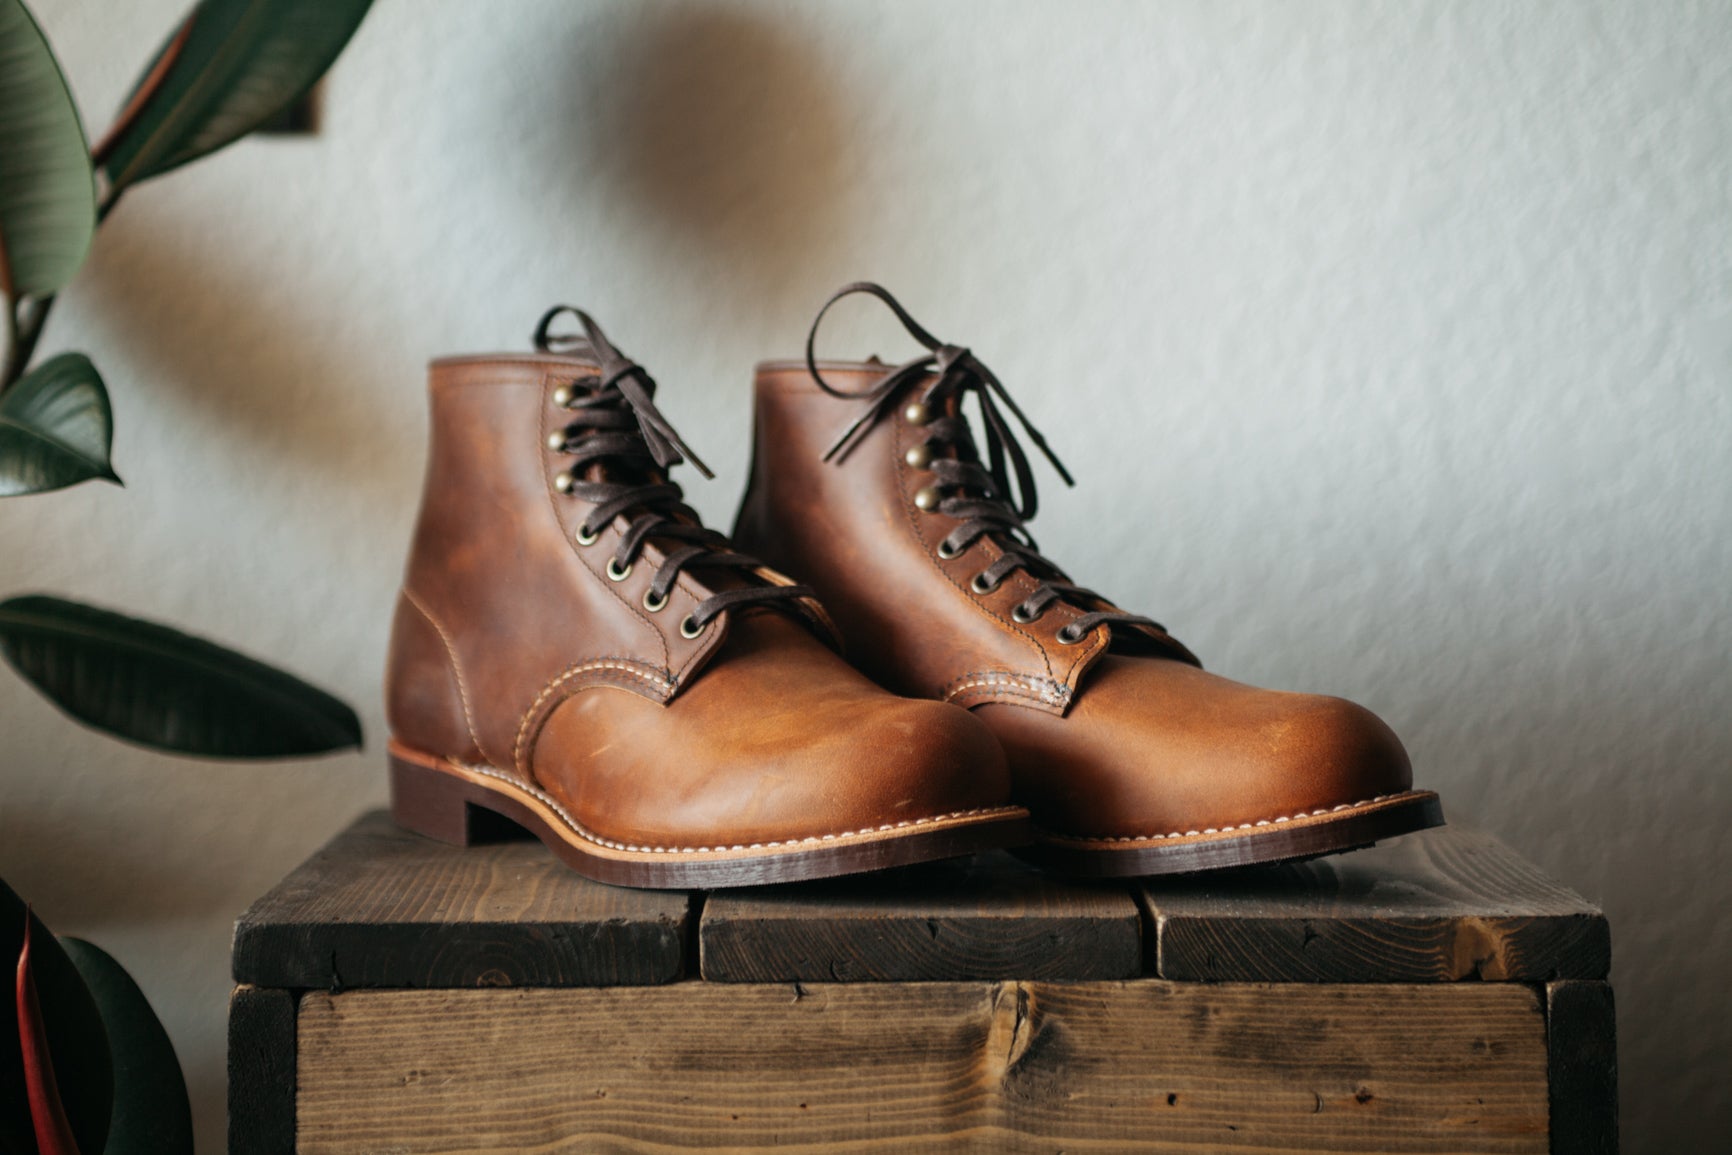 red wing boots blacksmith